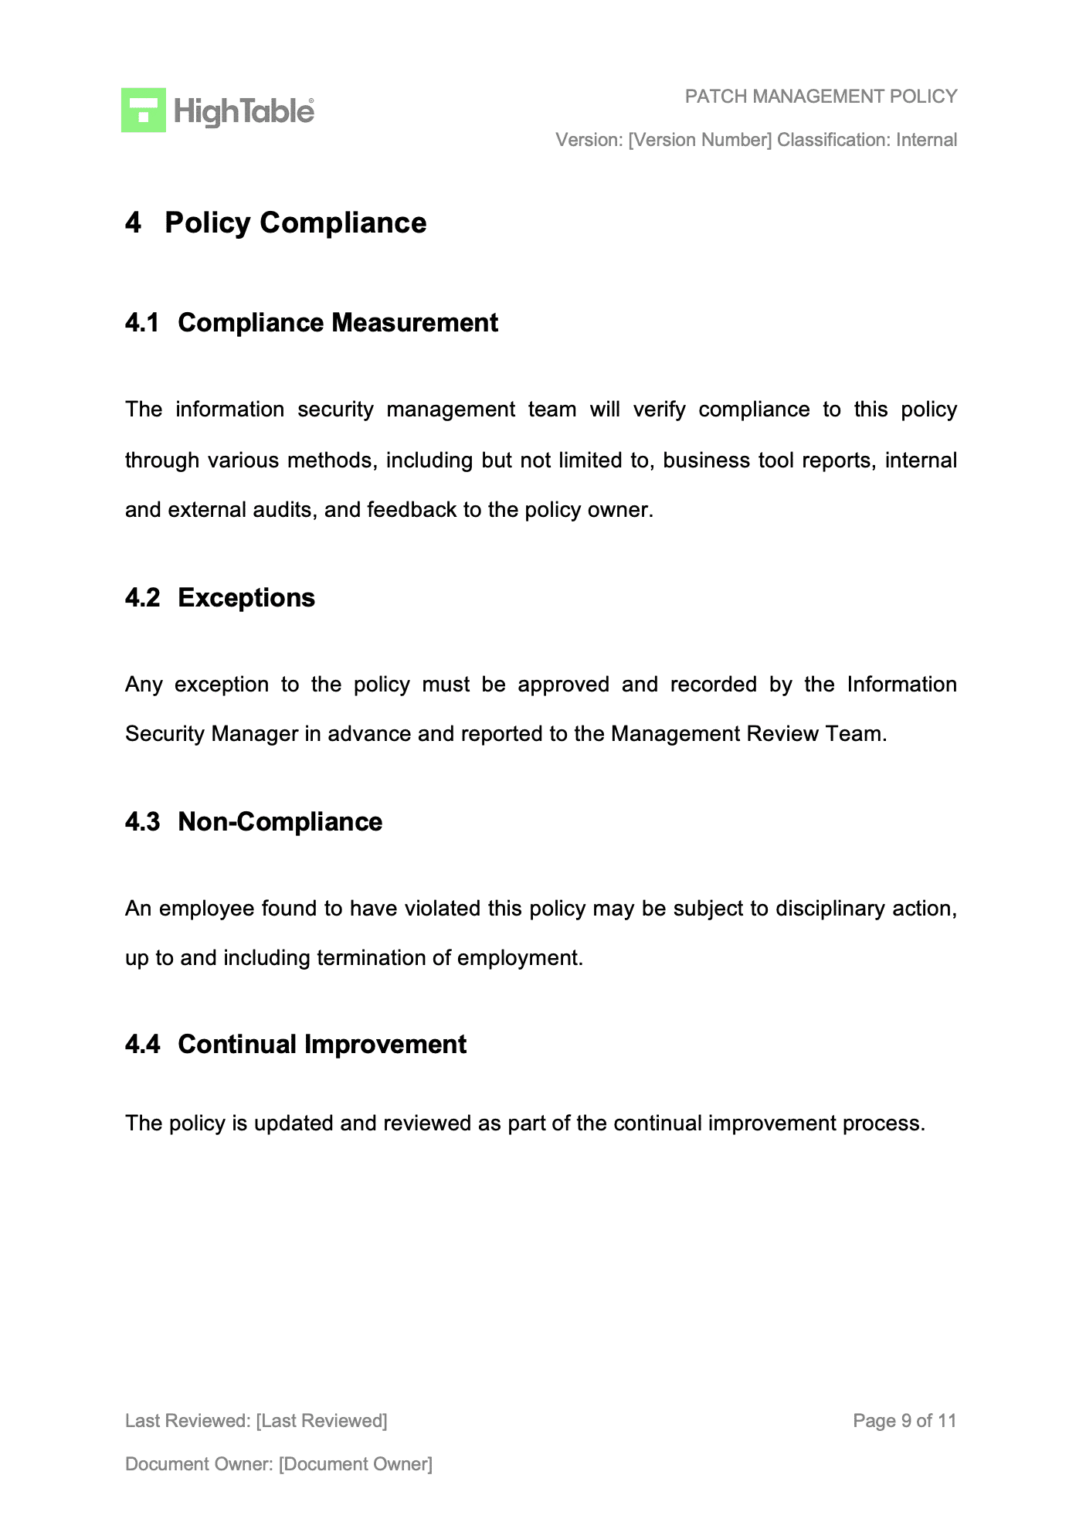 The Ultimate ISO 27001 Patch Management Policy Template